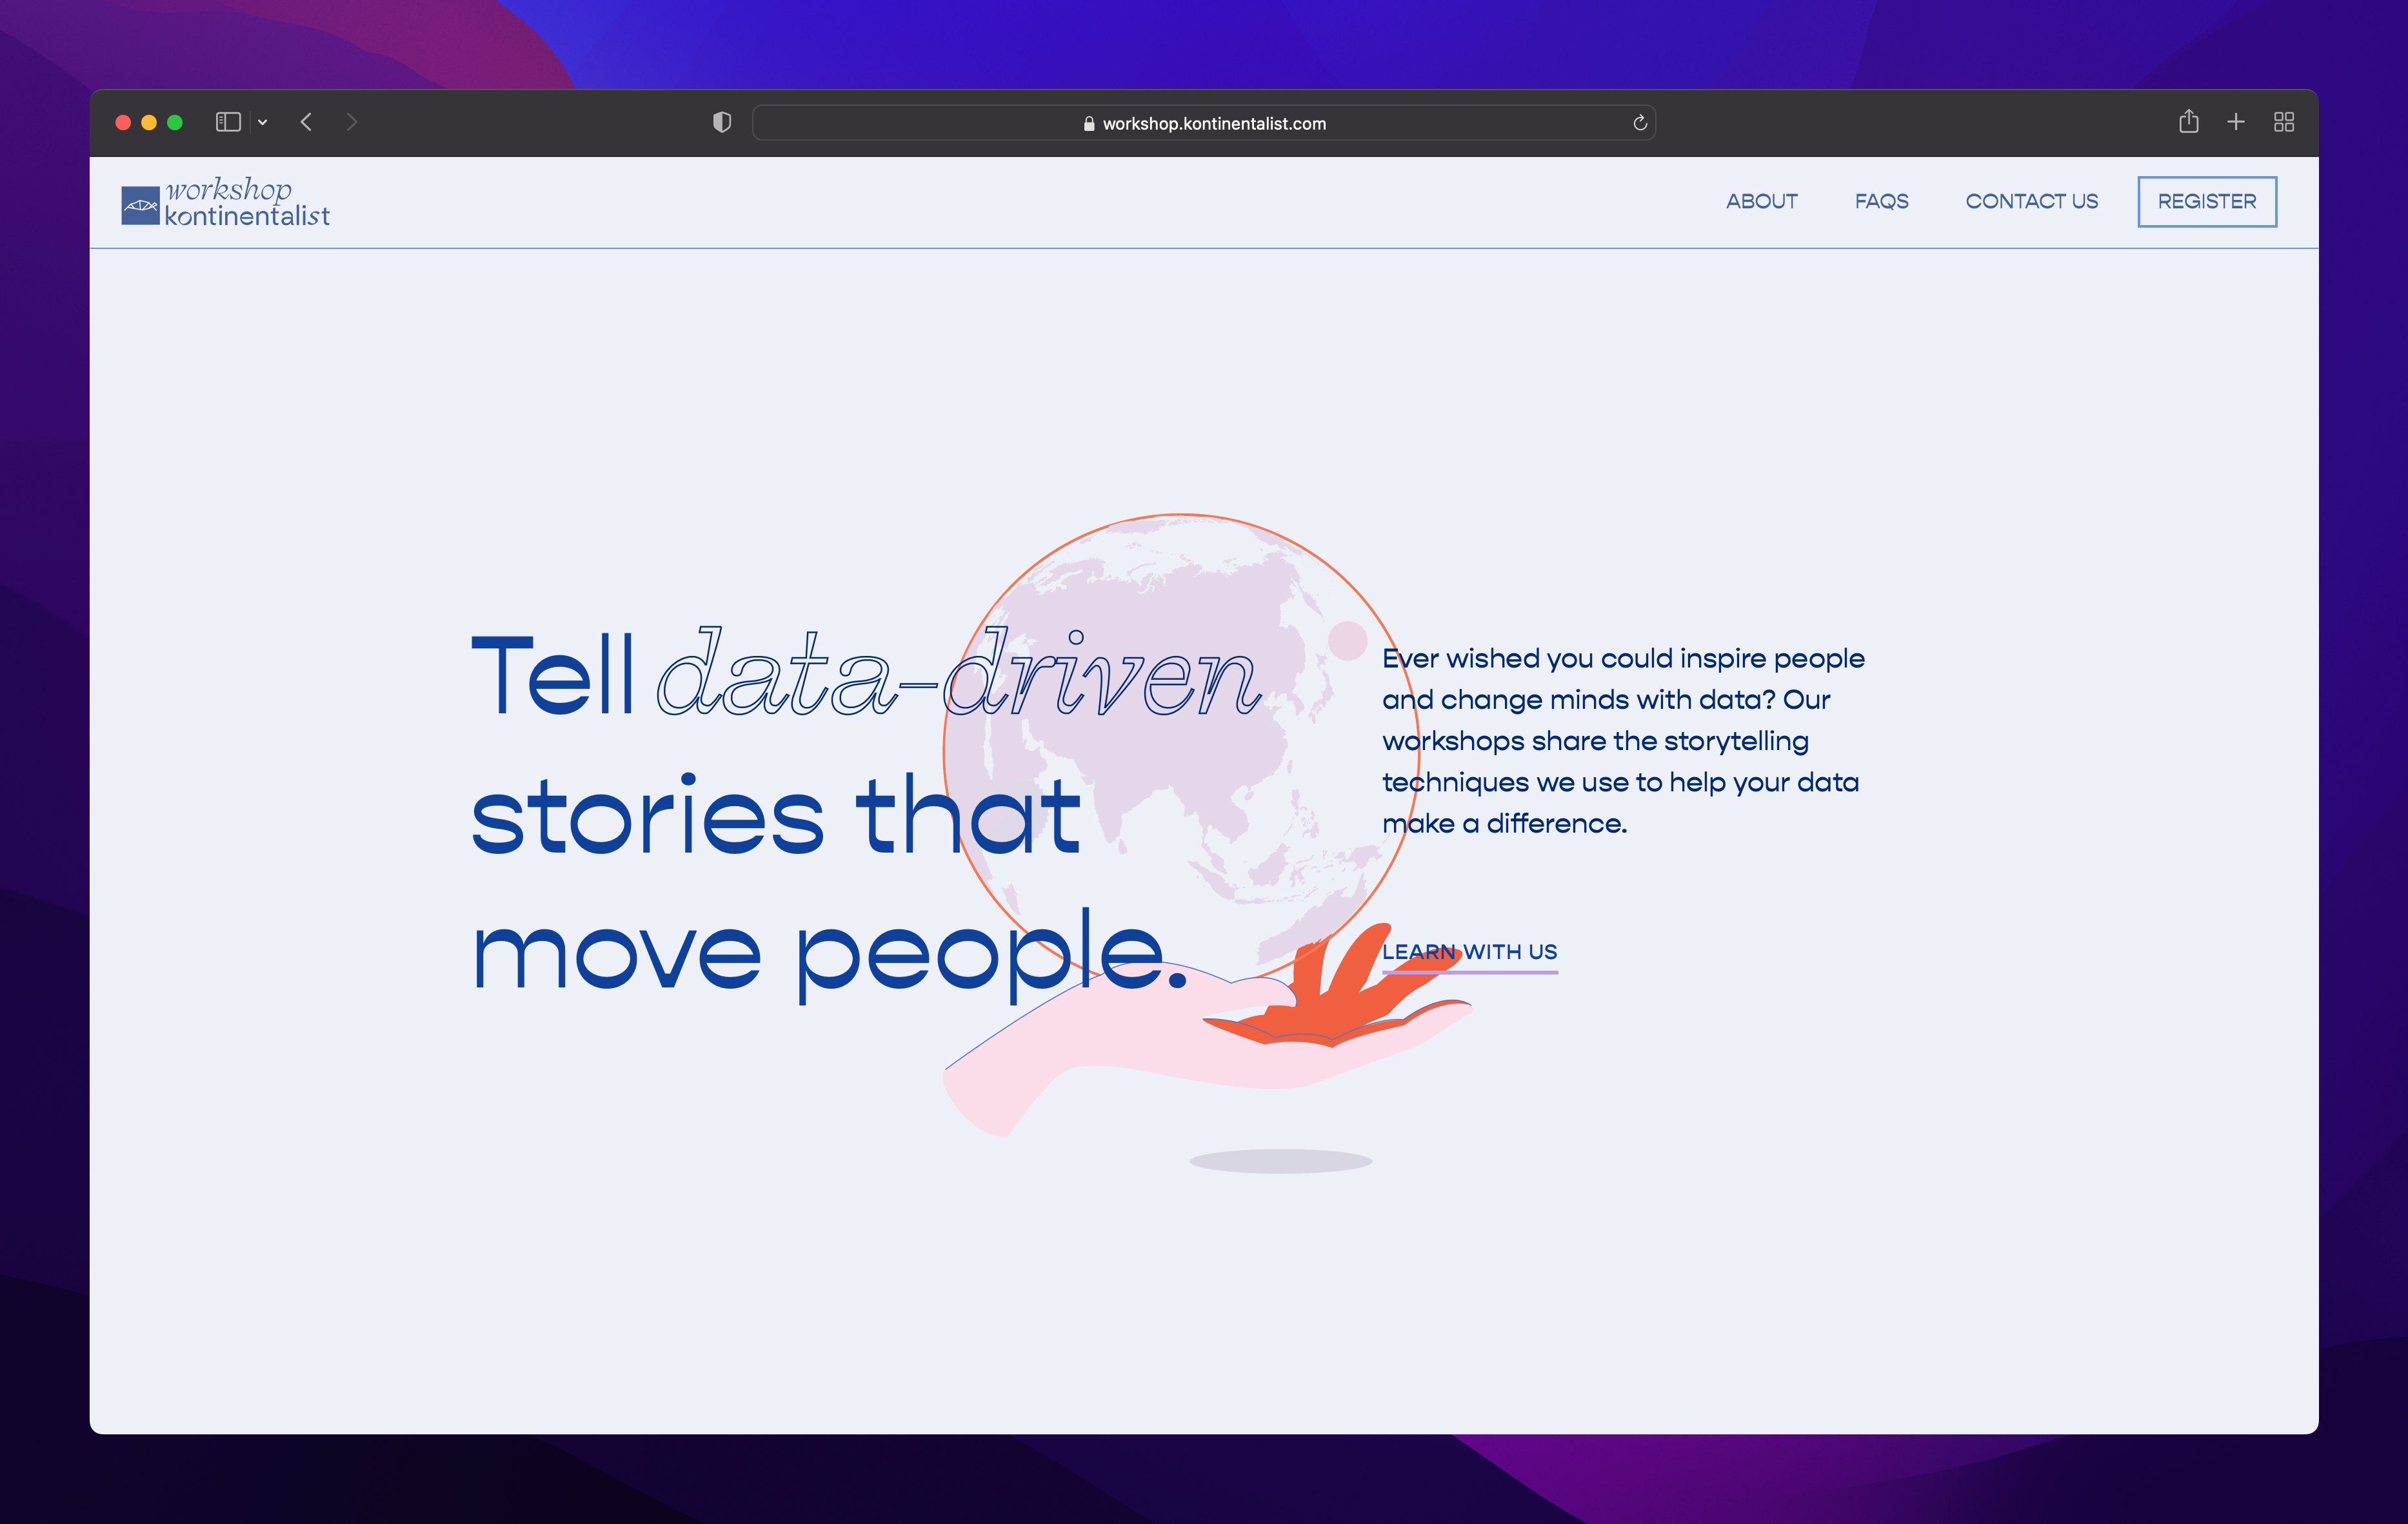 A thumbnail of a website of Workshop at Kontinentalist with ”Tell data-driven stories that move people” as the hero title.